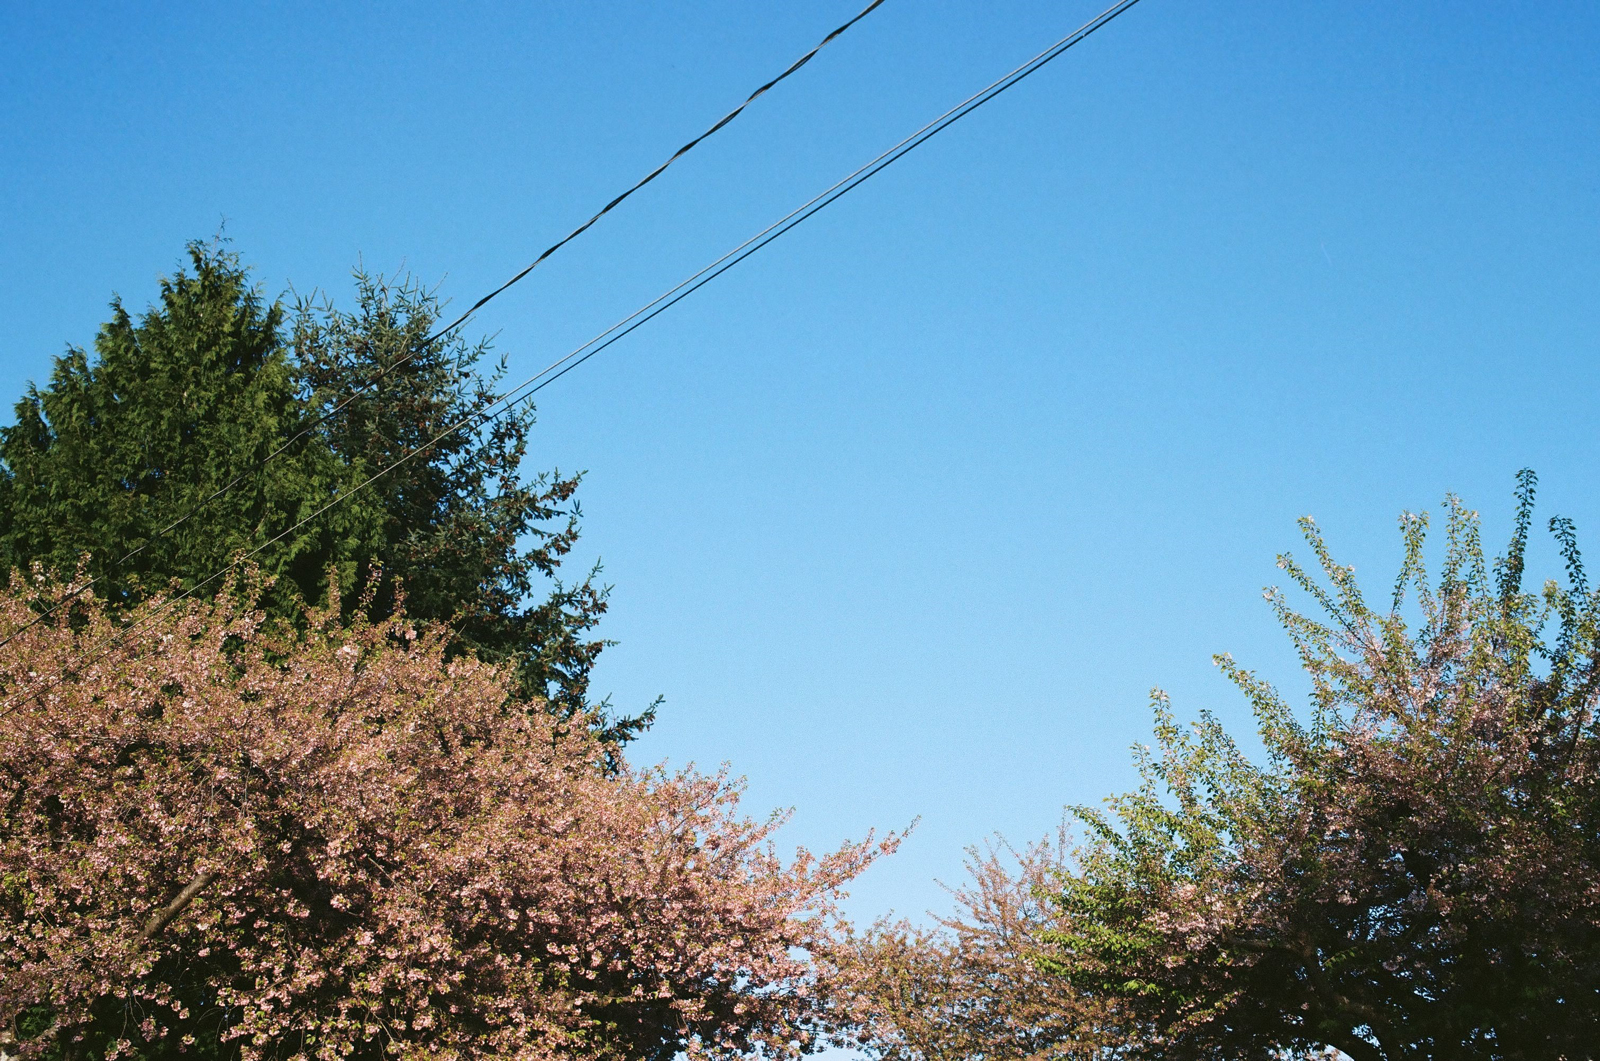 More spring trees and power lines.